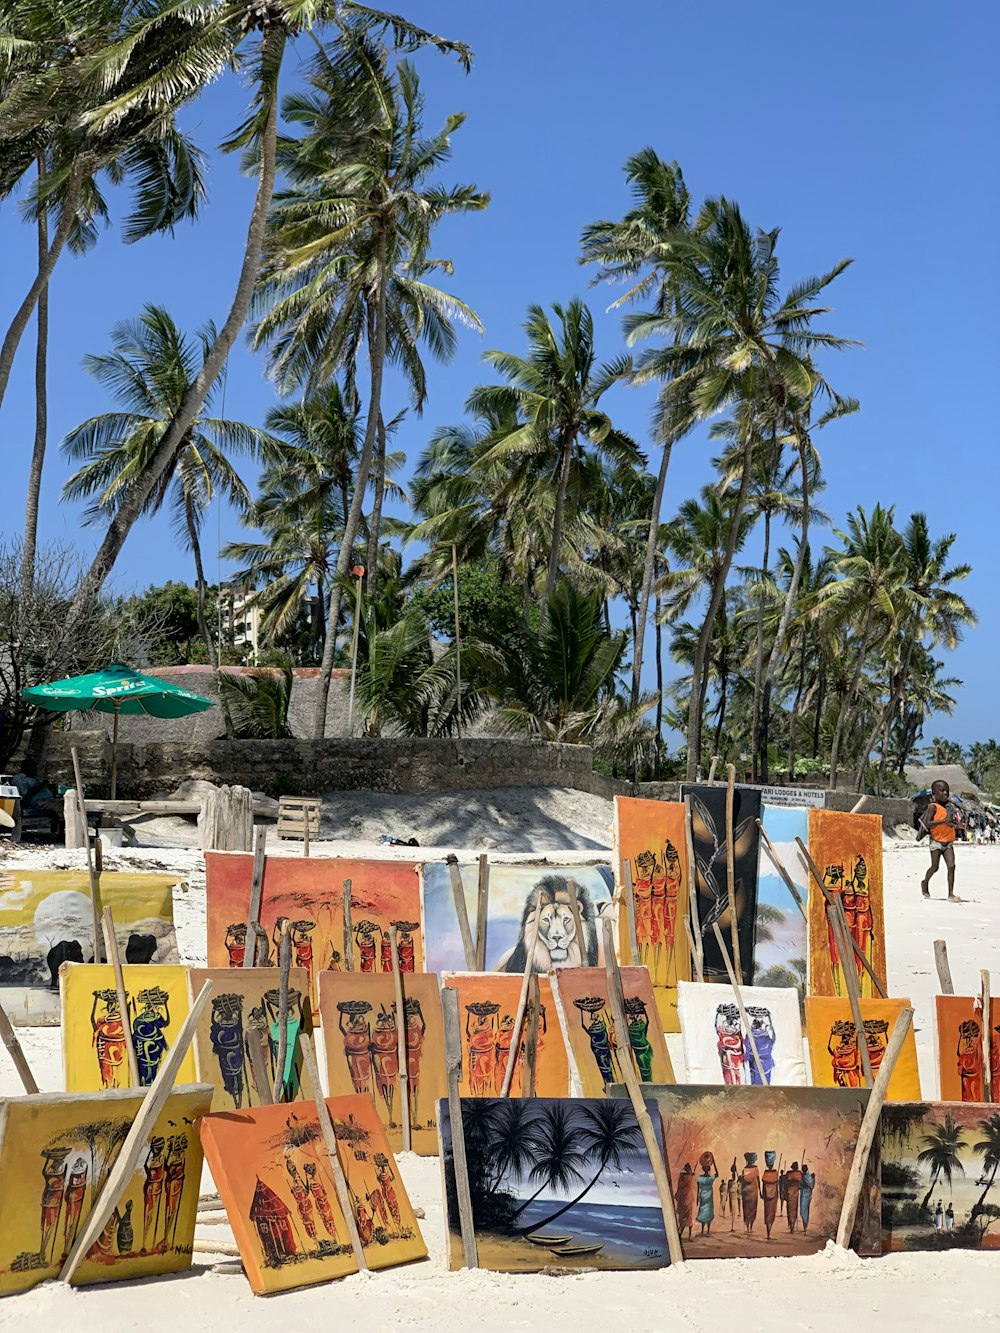 a number of paintings on a beach near palm trees